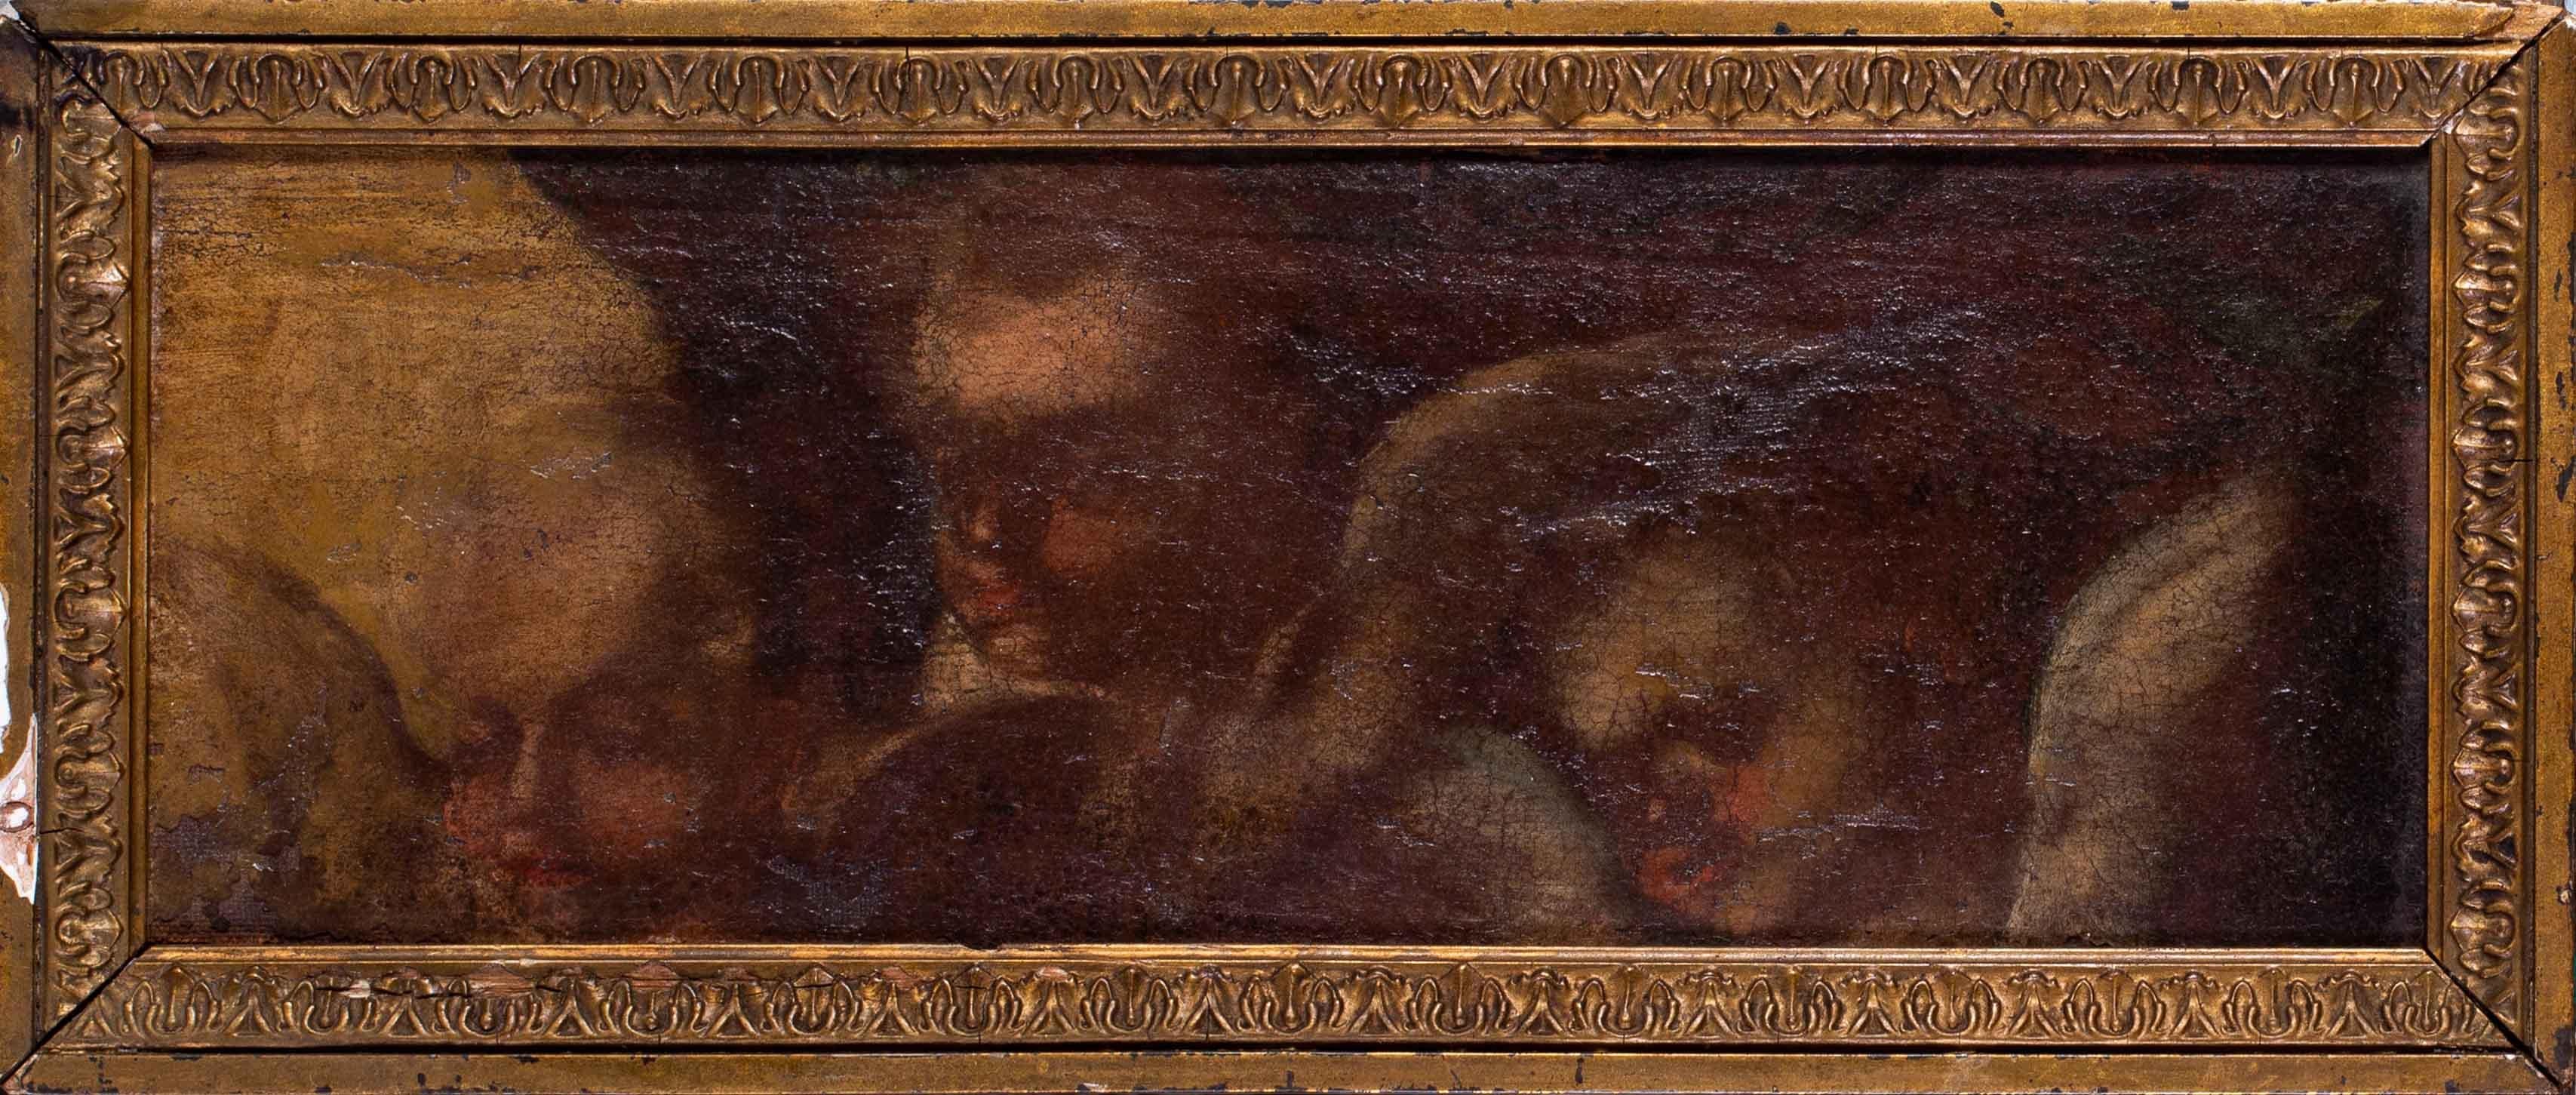 Unknown Figurative Painting - French School, 17th / 18th Century oil painting of Seraphim, a fragment